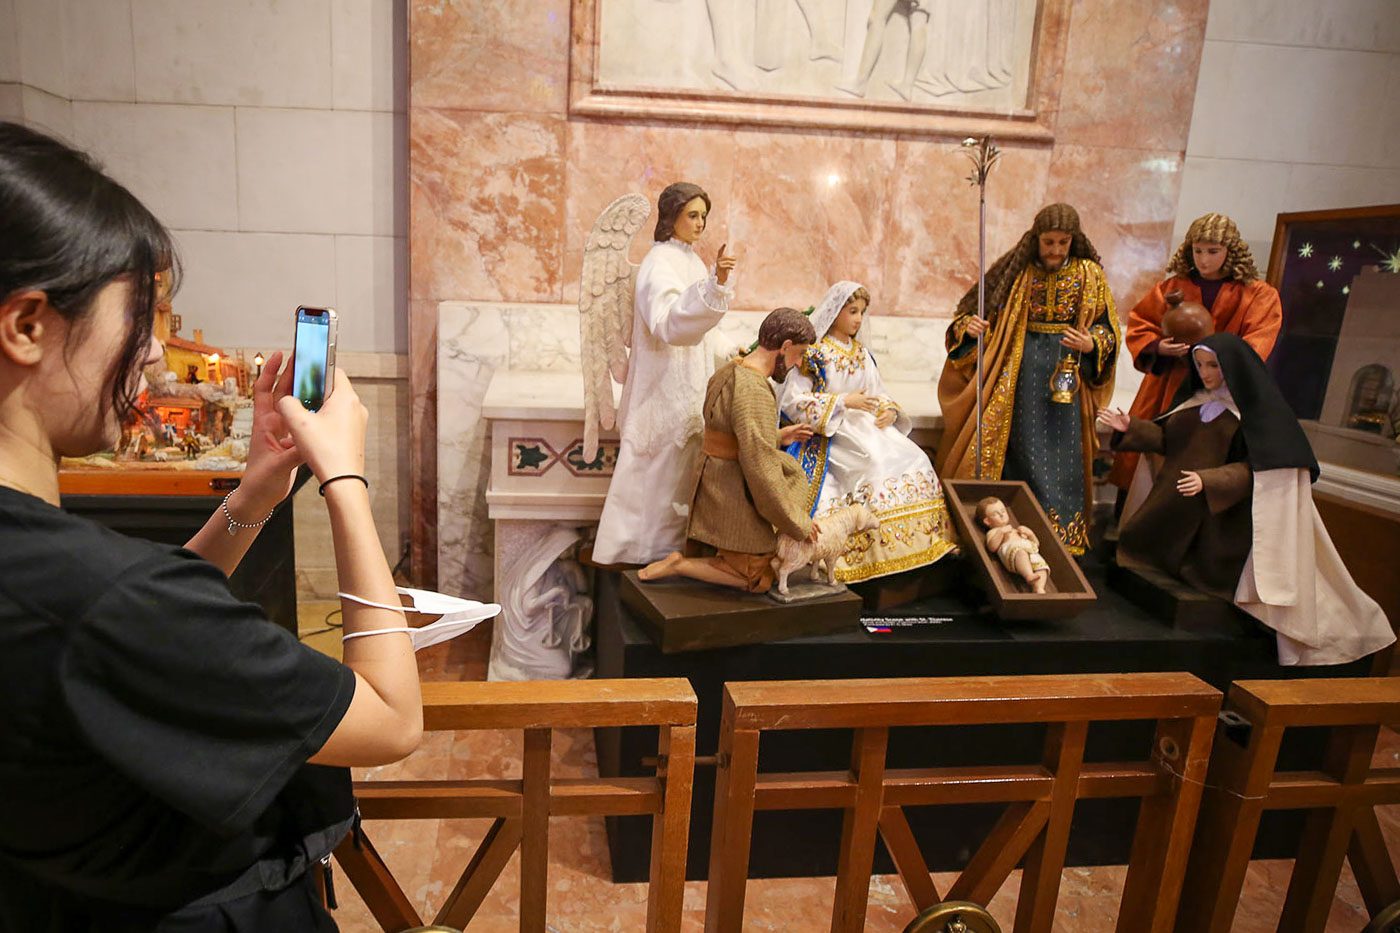 Who is at the manger? Nativity sets around the world show each culture’s take on the Christmas story